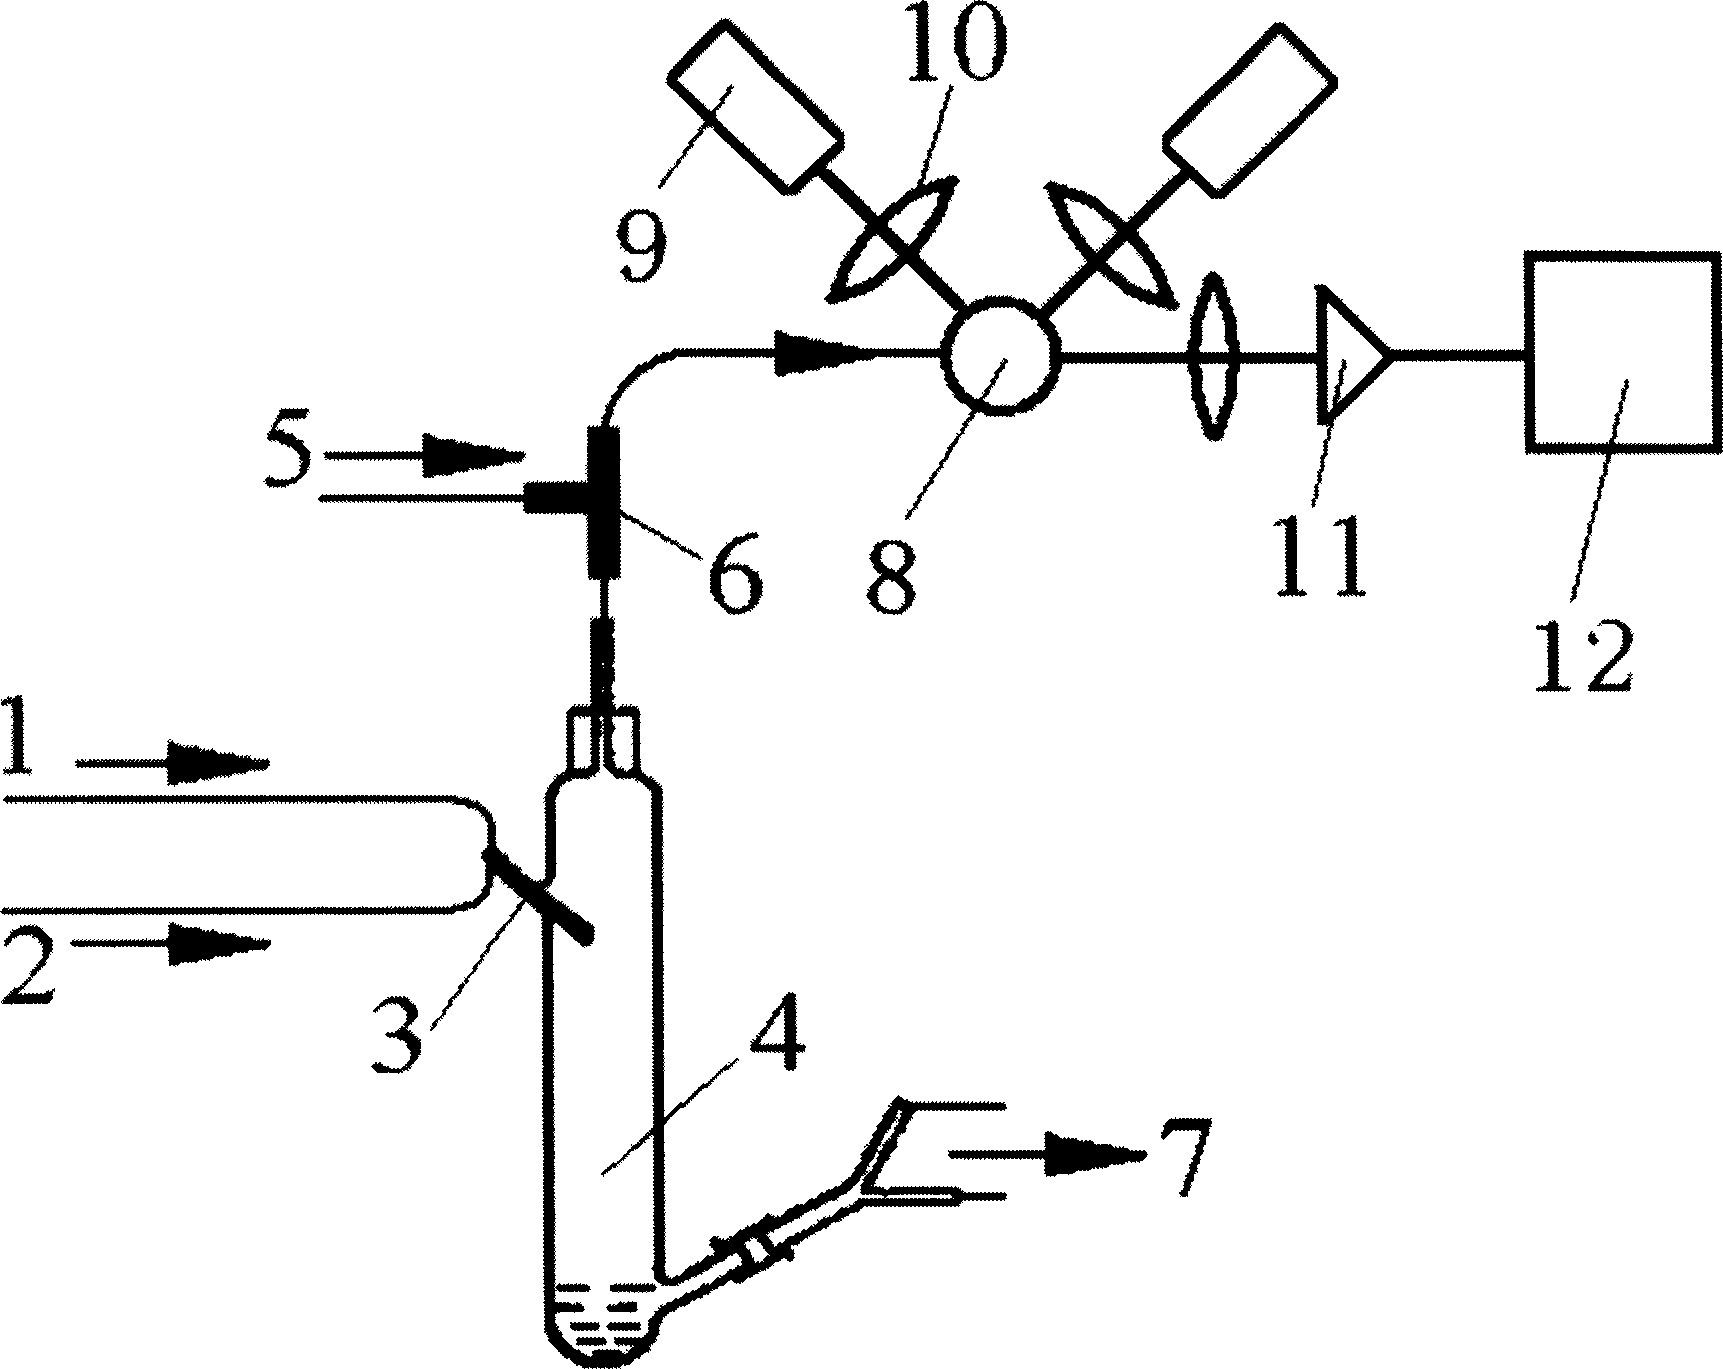 Method and apparatus for measuring chromium by chemical vapor generation-atomic fluorescence spectrometry